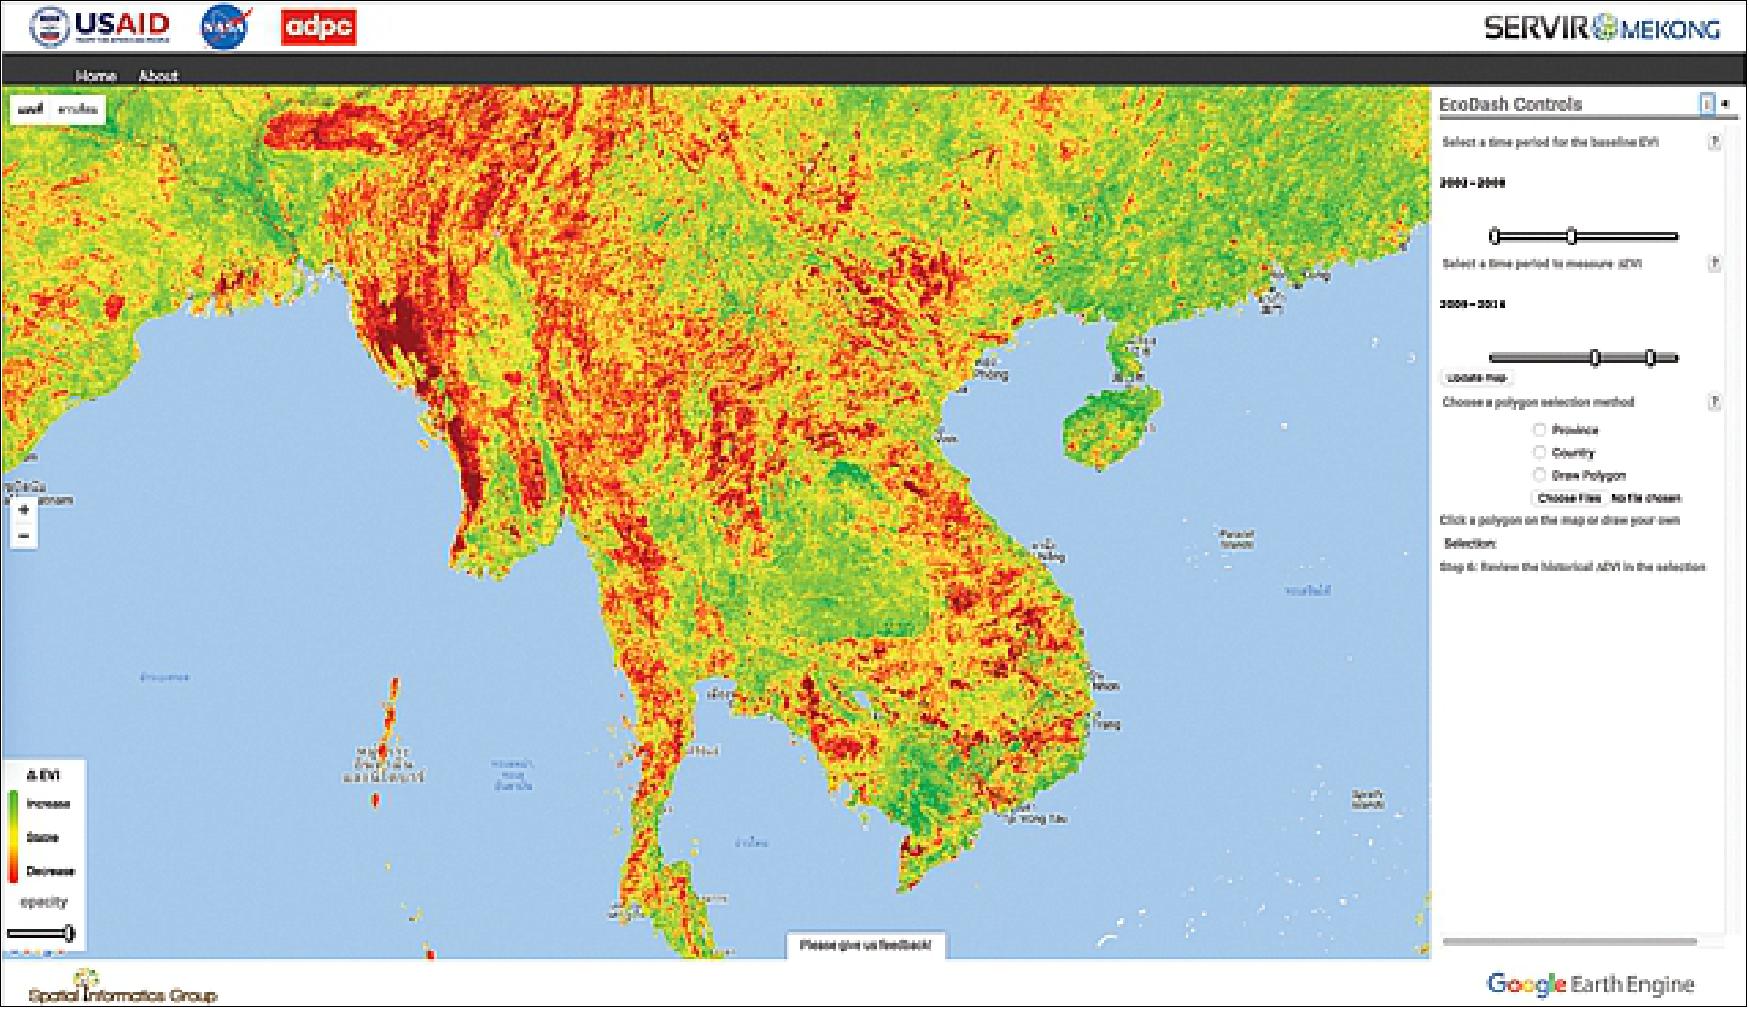 Figure 7: Eco-Dash was developed by the SERVIR-Mekong team at the request of a U.S. NGO. Eco-Dash crunches multispectral imagery data from satellites and runs them through an algorithm to generate a graphical depiction of how vegetation is changing. Green indicates an increase in vegetation, red indicates a decrease, and yellow indicates no change (image credit: SERVIR-Mekong/ADPC)